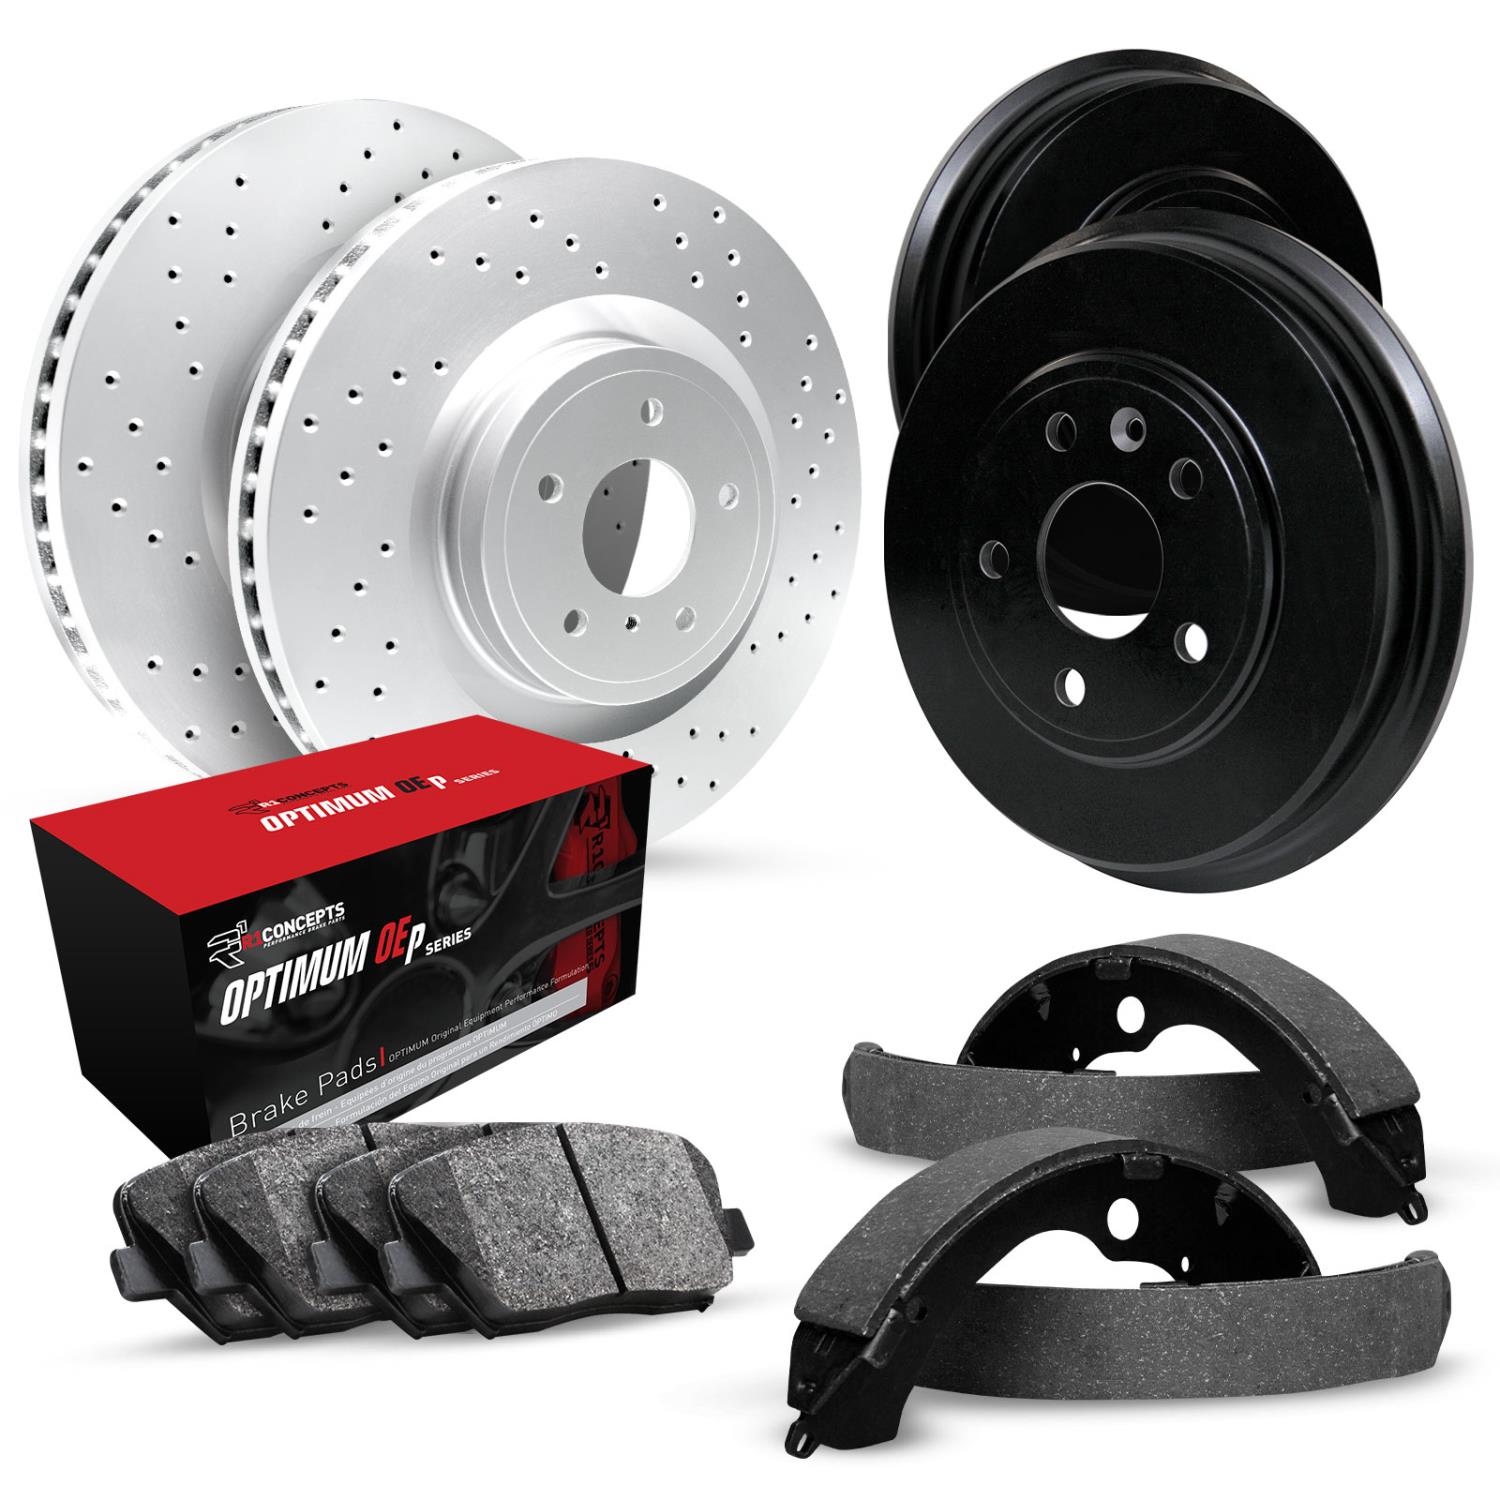 GEO-Carbon Drilled Brake Rotor & Drum Set w/Optimum OE Pads & Shoes, 1988-1991 Acura/Honda, Position: Front & Rear